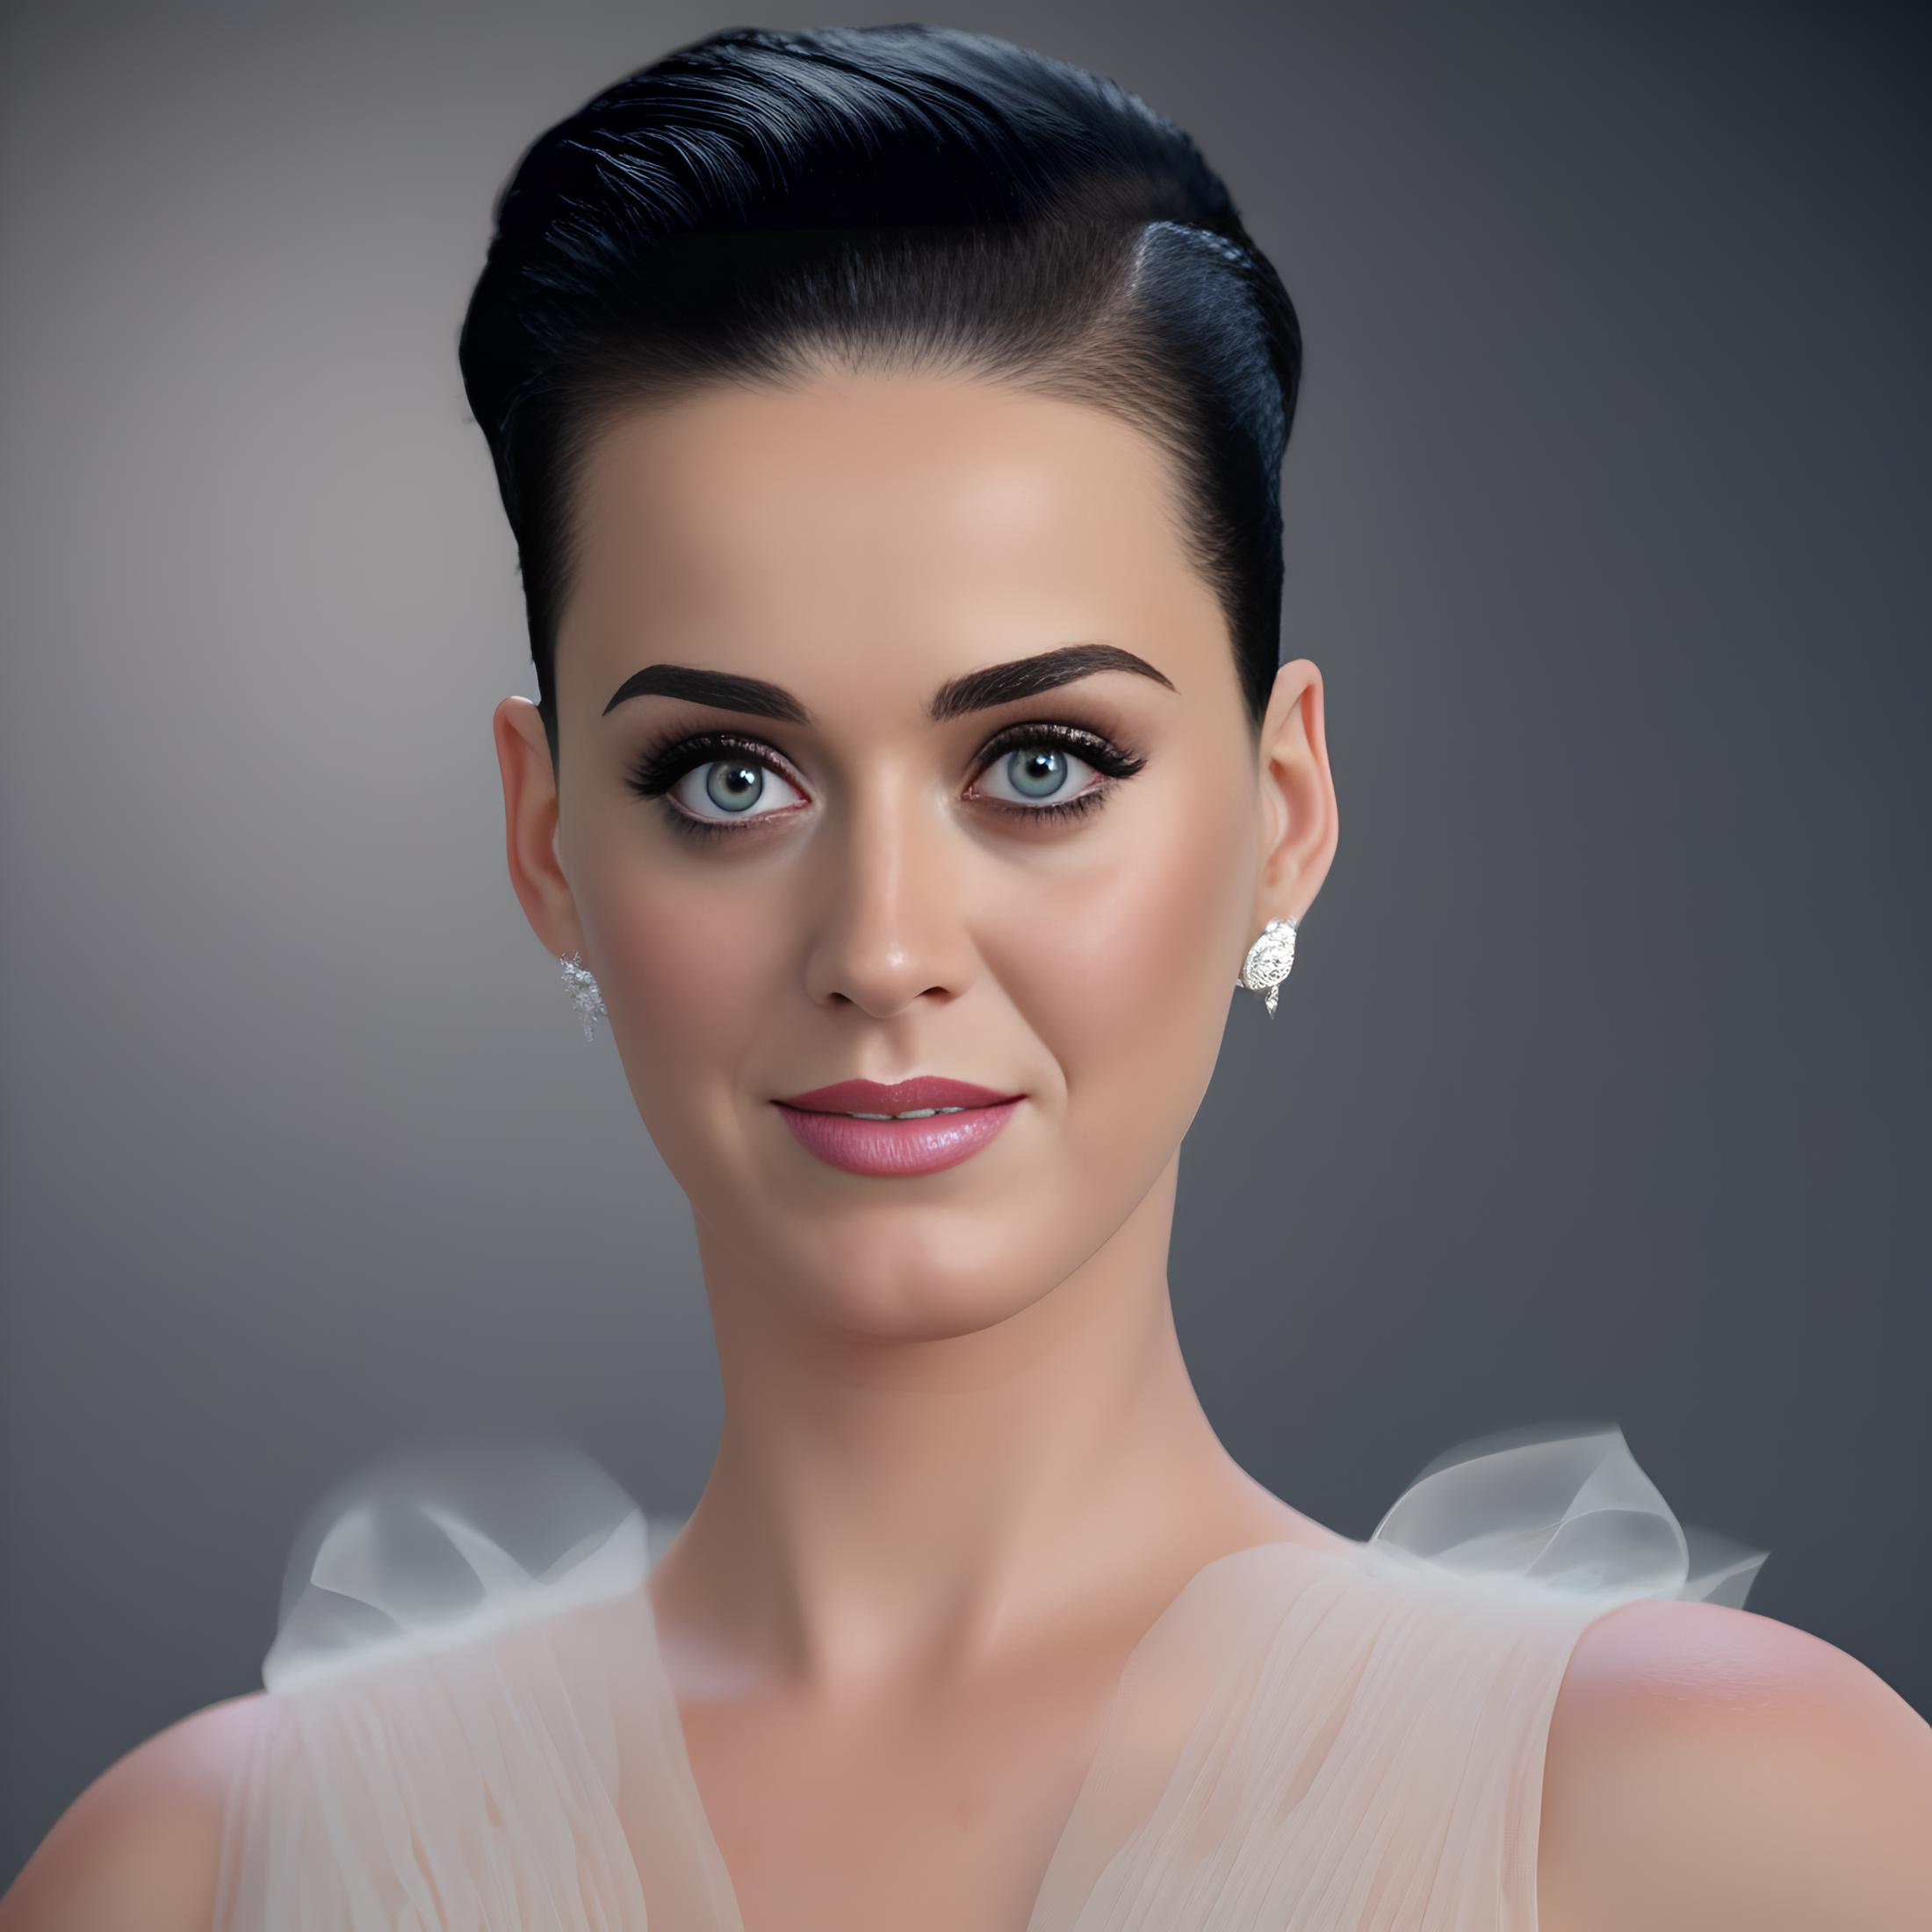 Katy Perry image by parar20